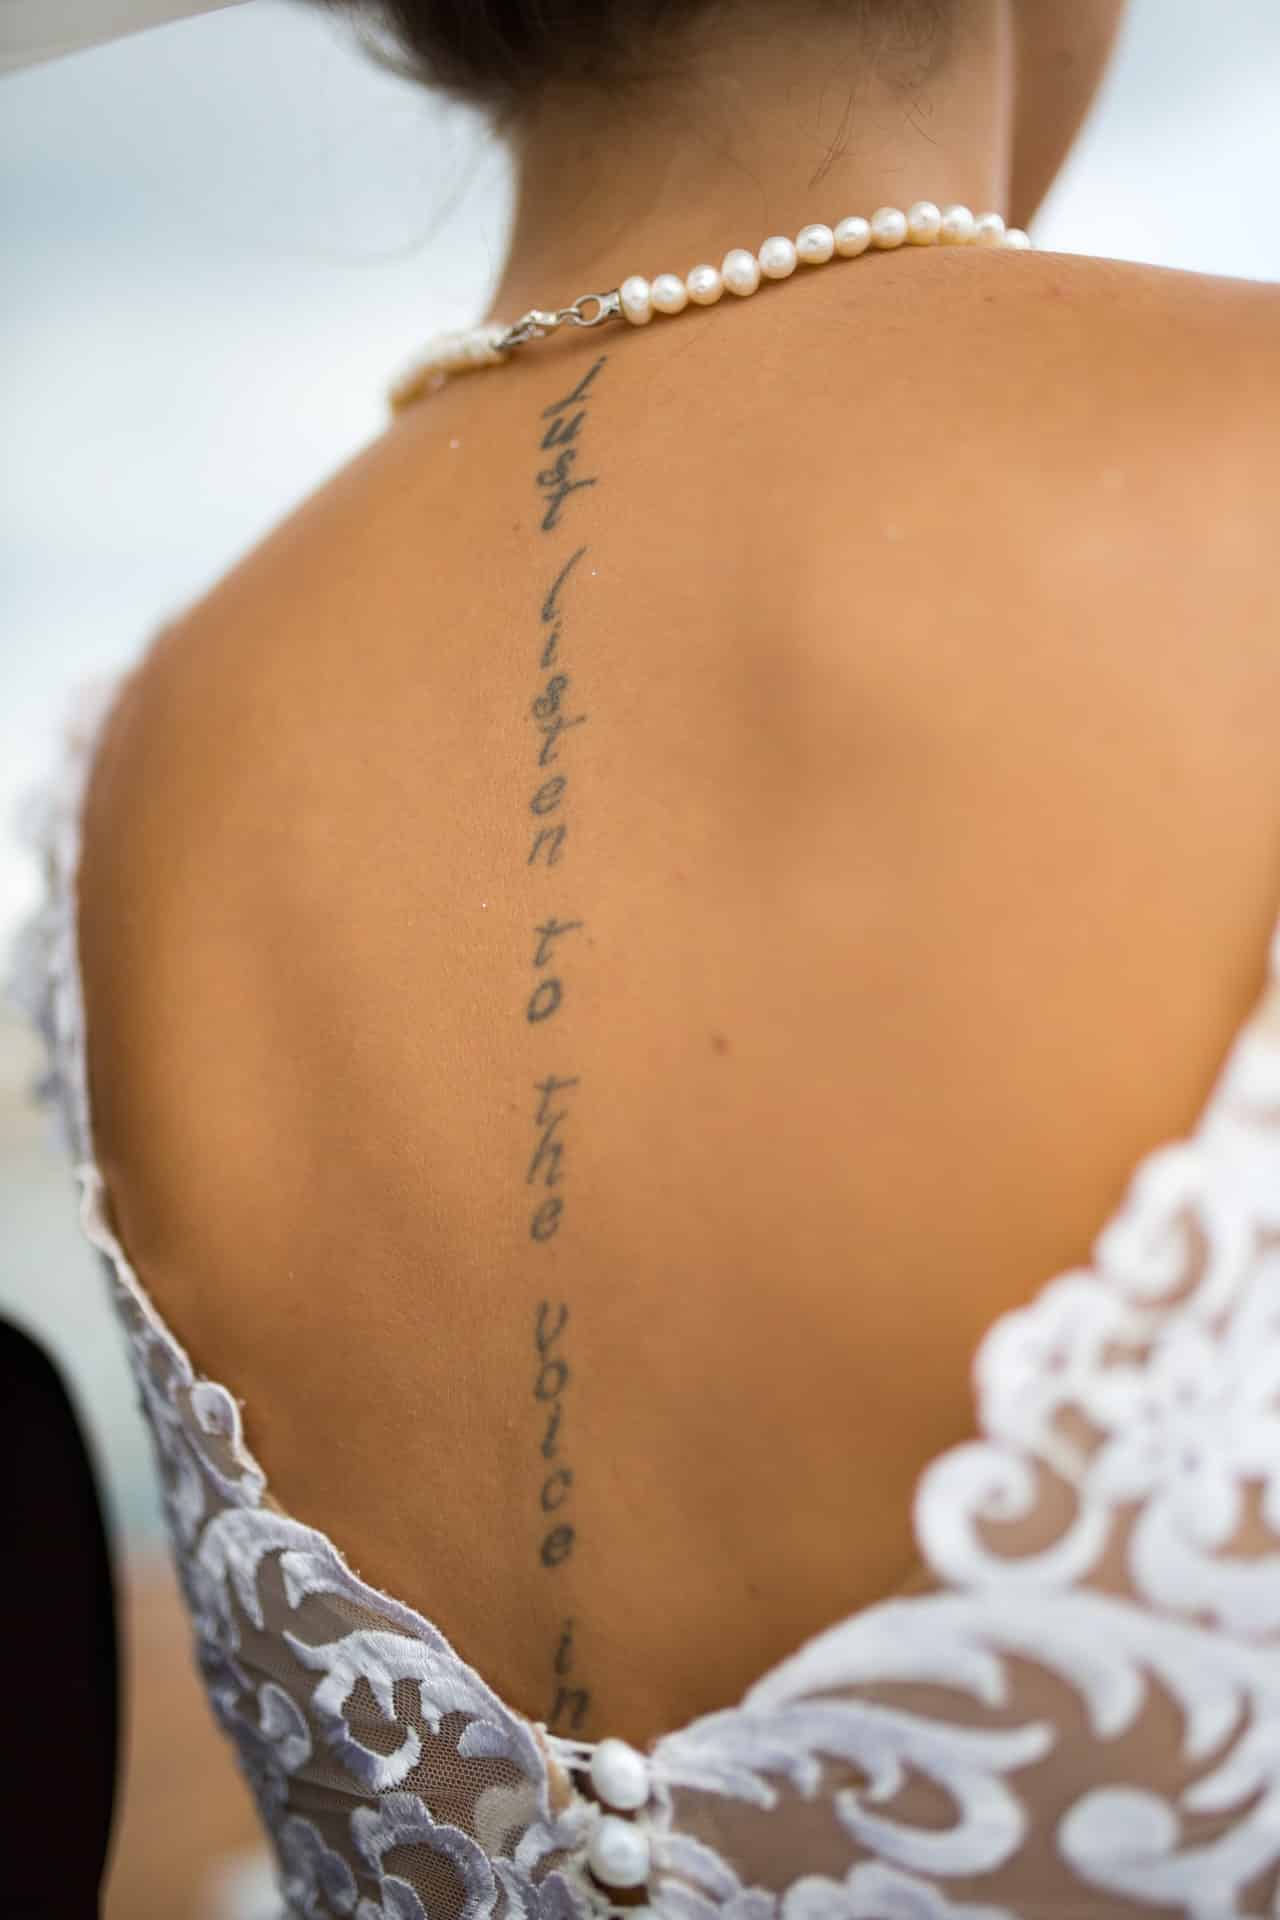 Text on Spine Back Tattoo